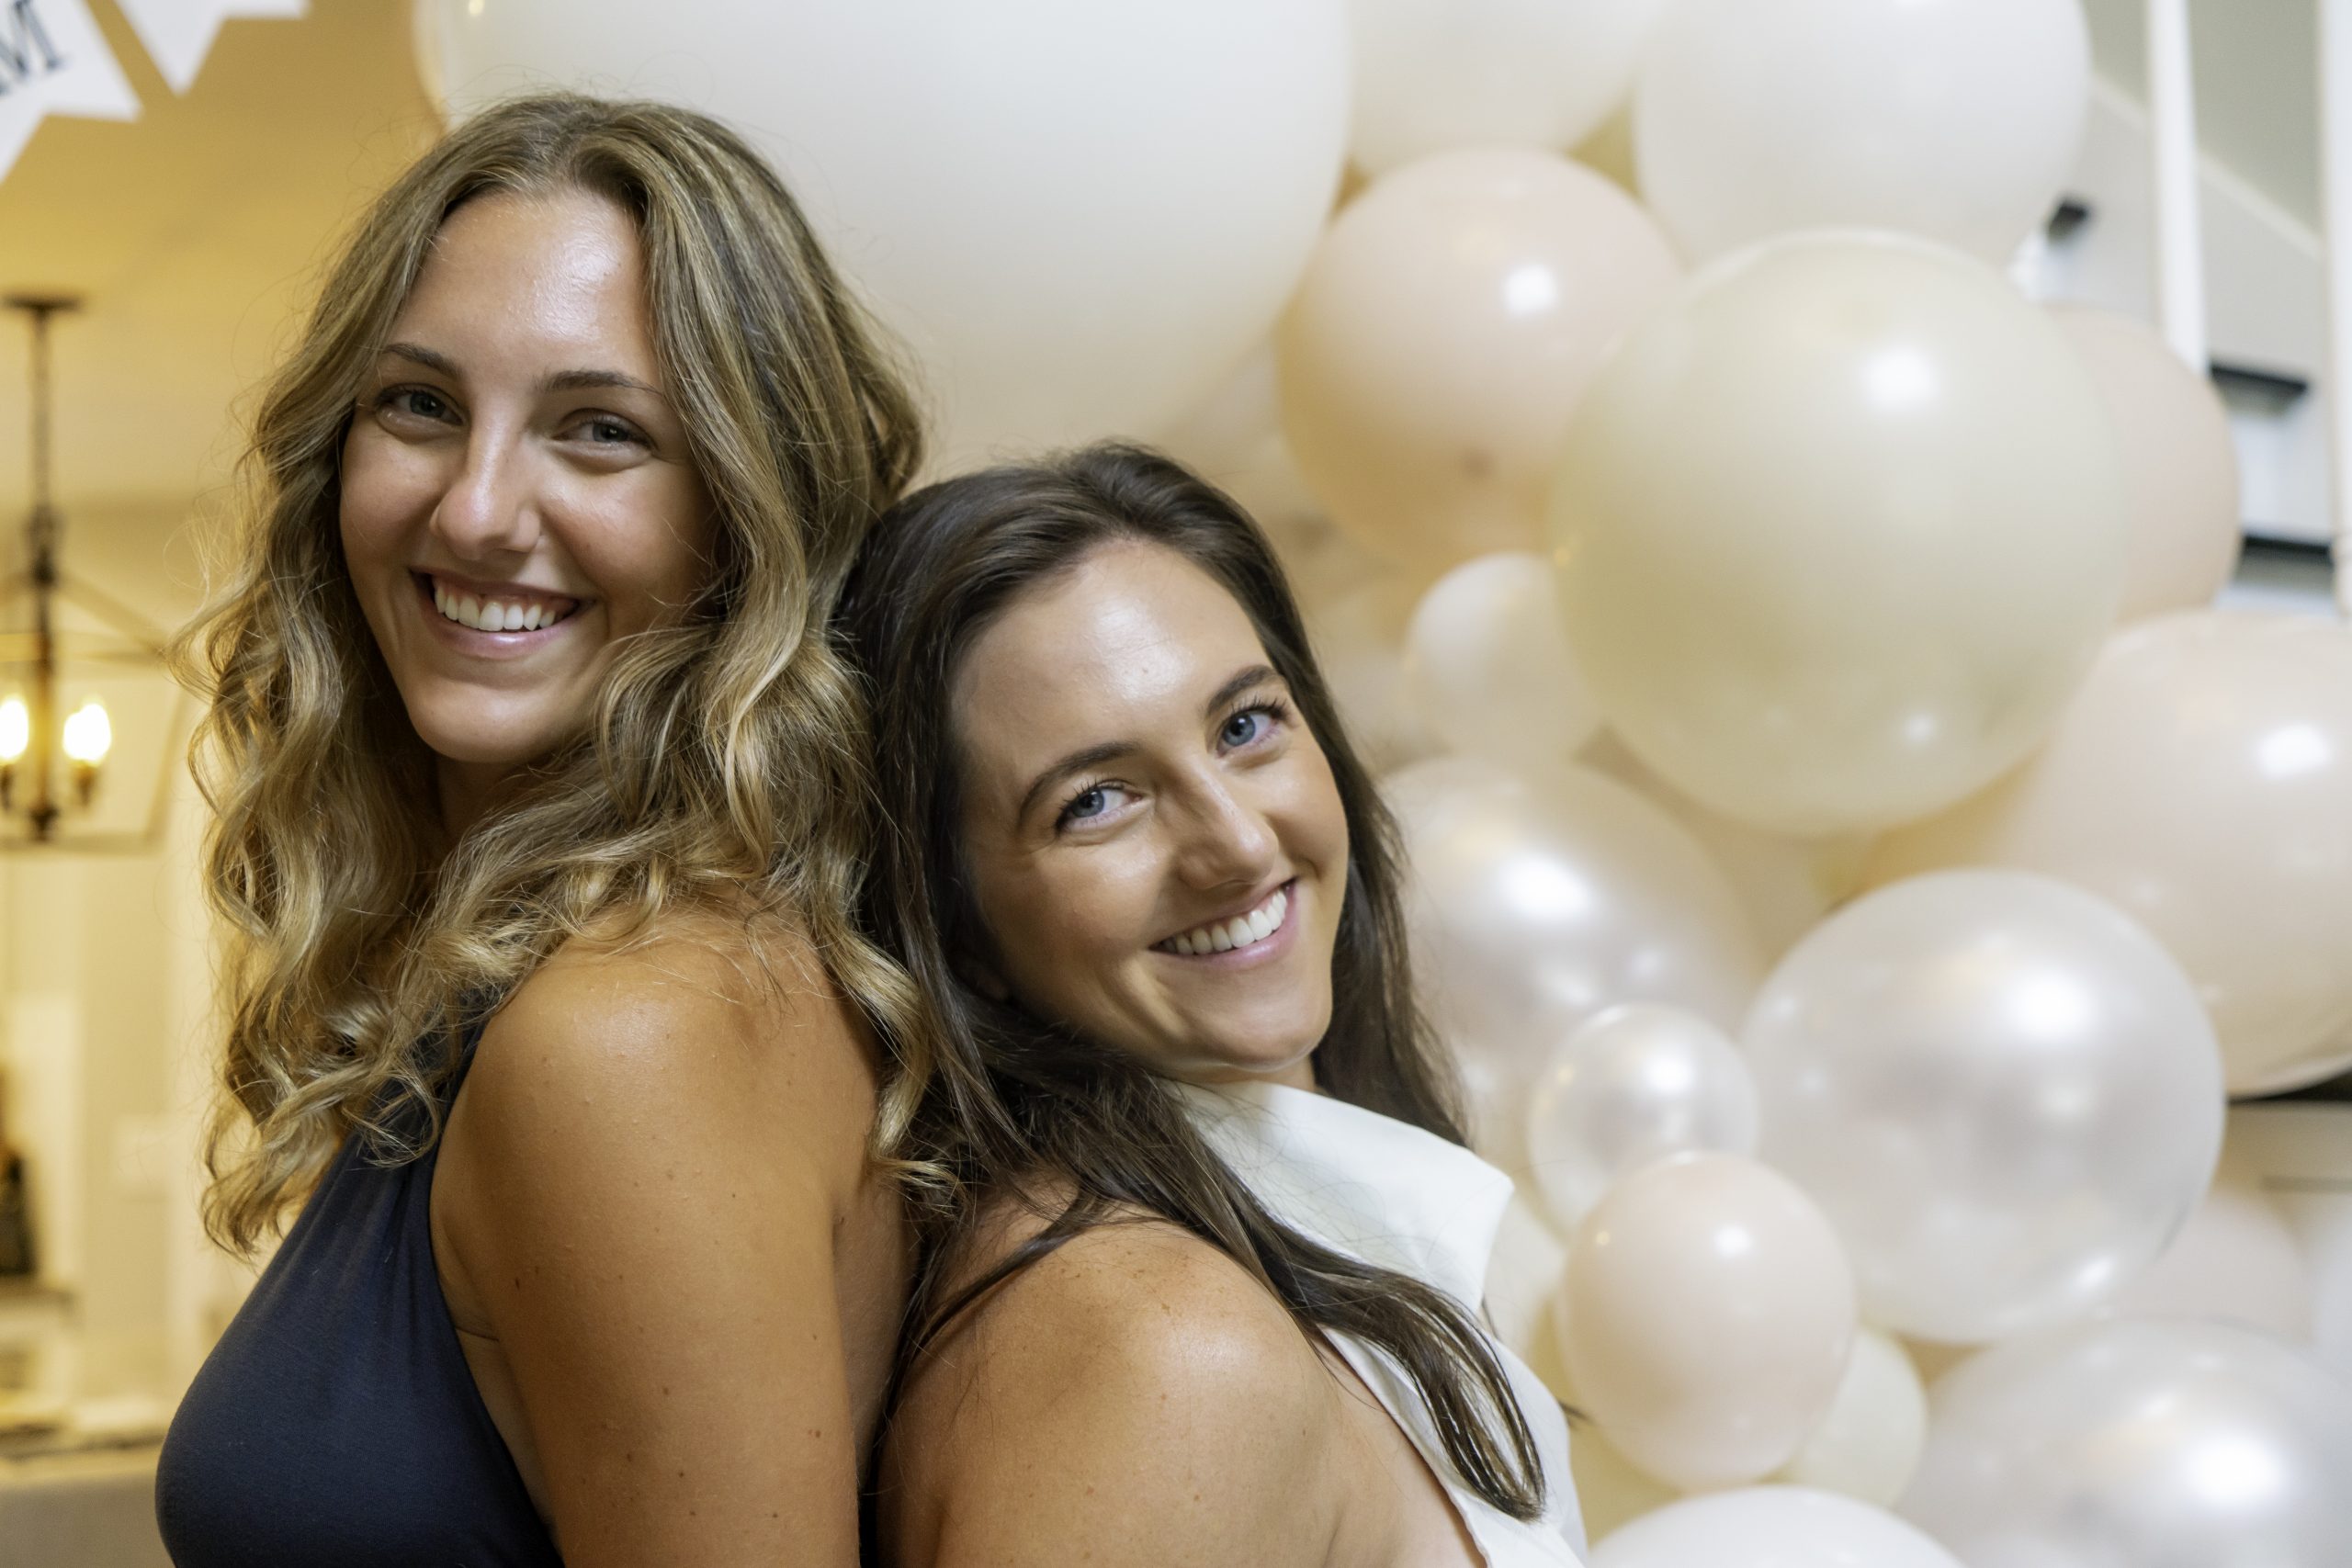 two women standing next to each other in front of balloons